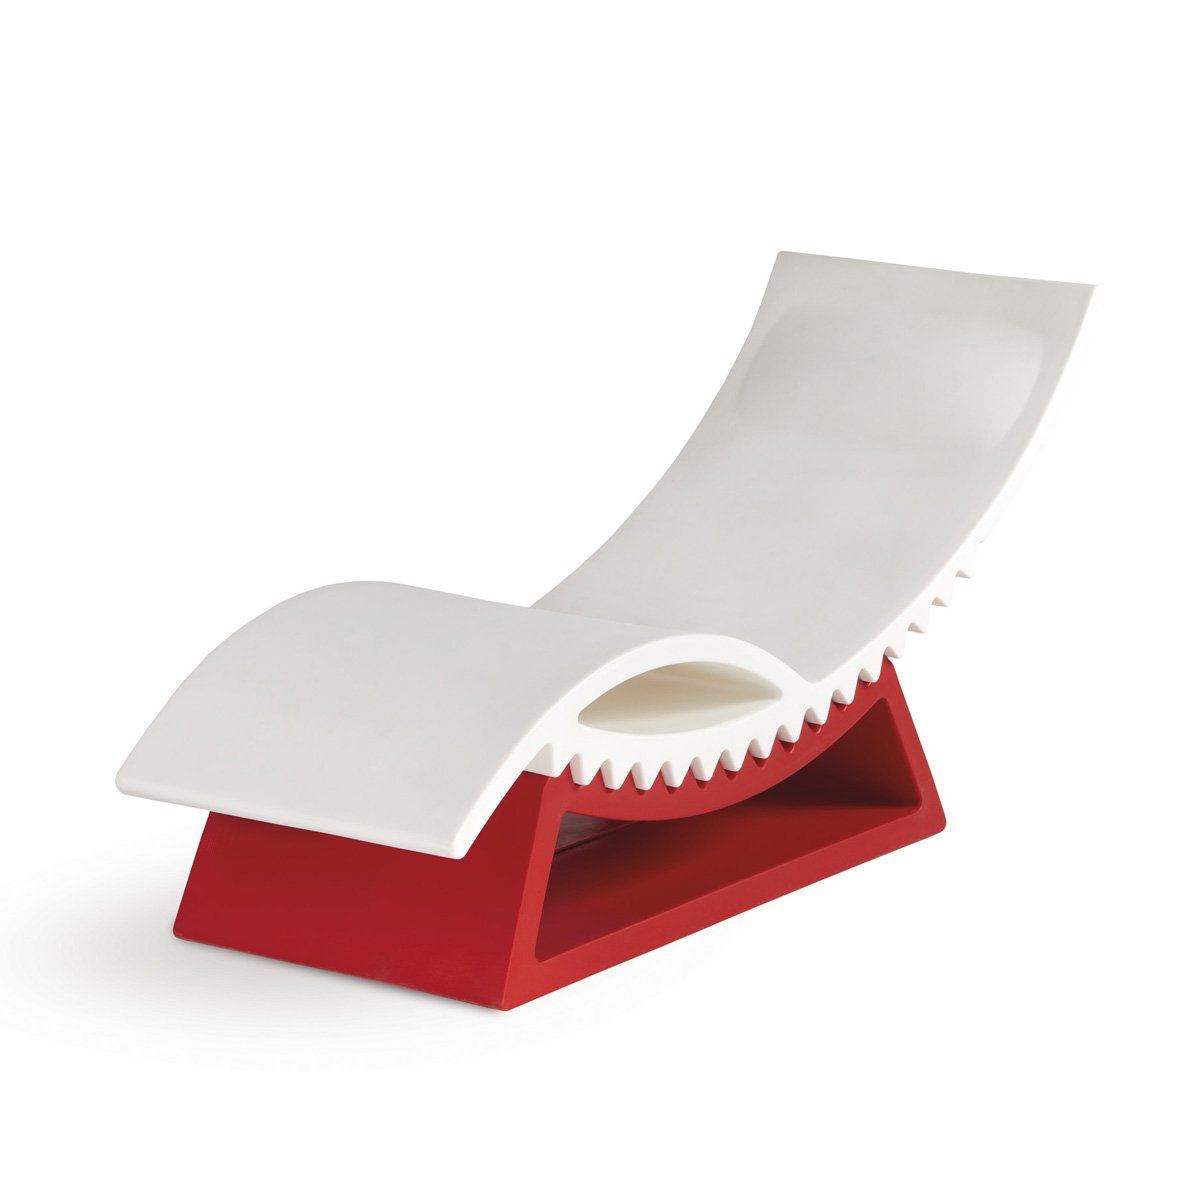 Tic Tac lounger from Slide